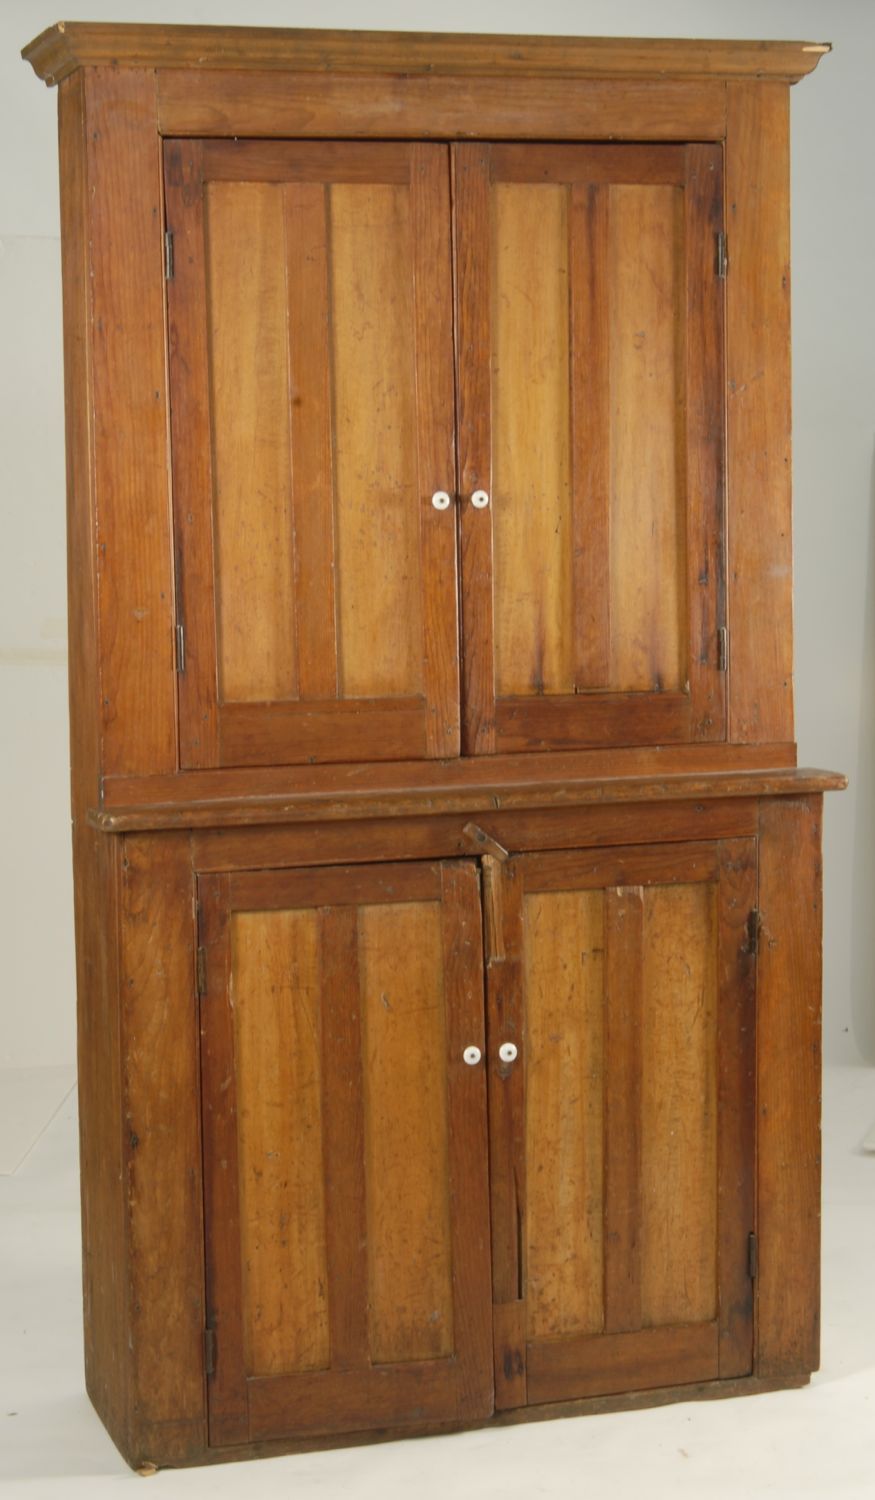 ANTIQUE AMERICAN ONE-PART HUTCH